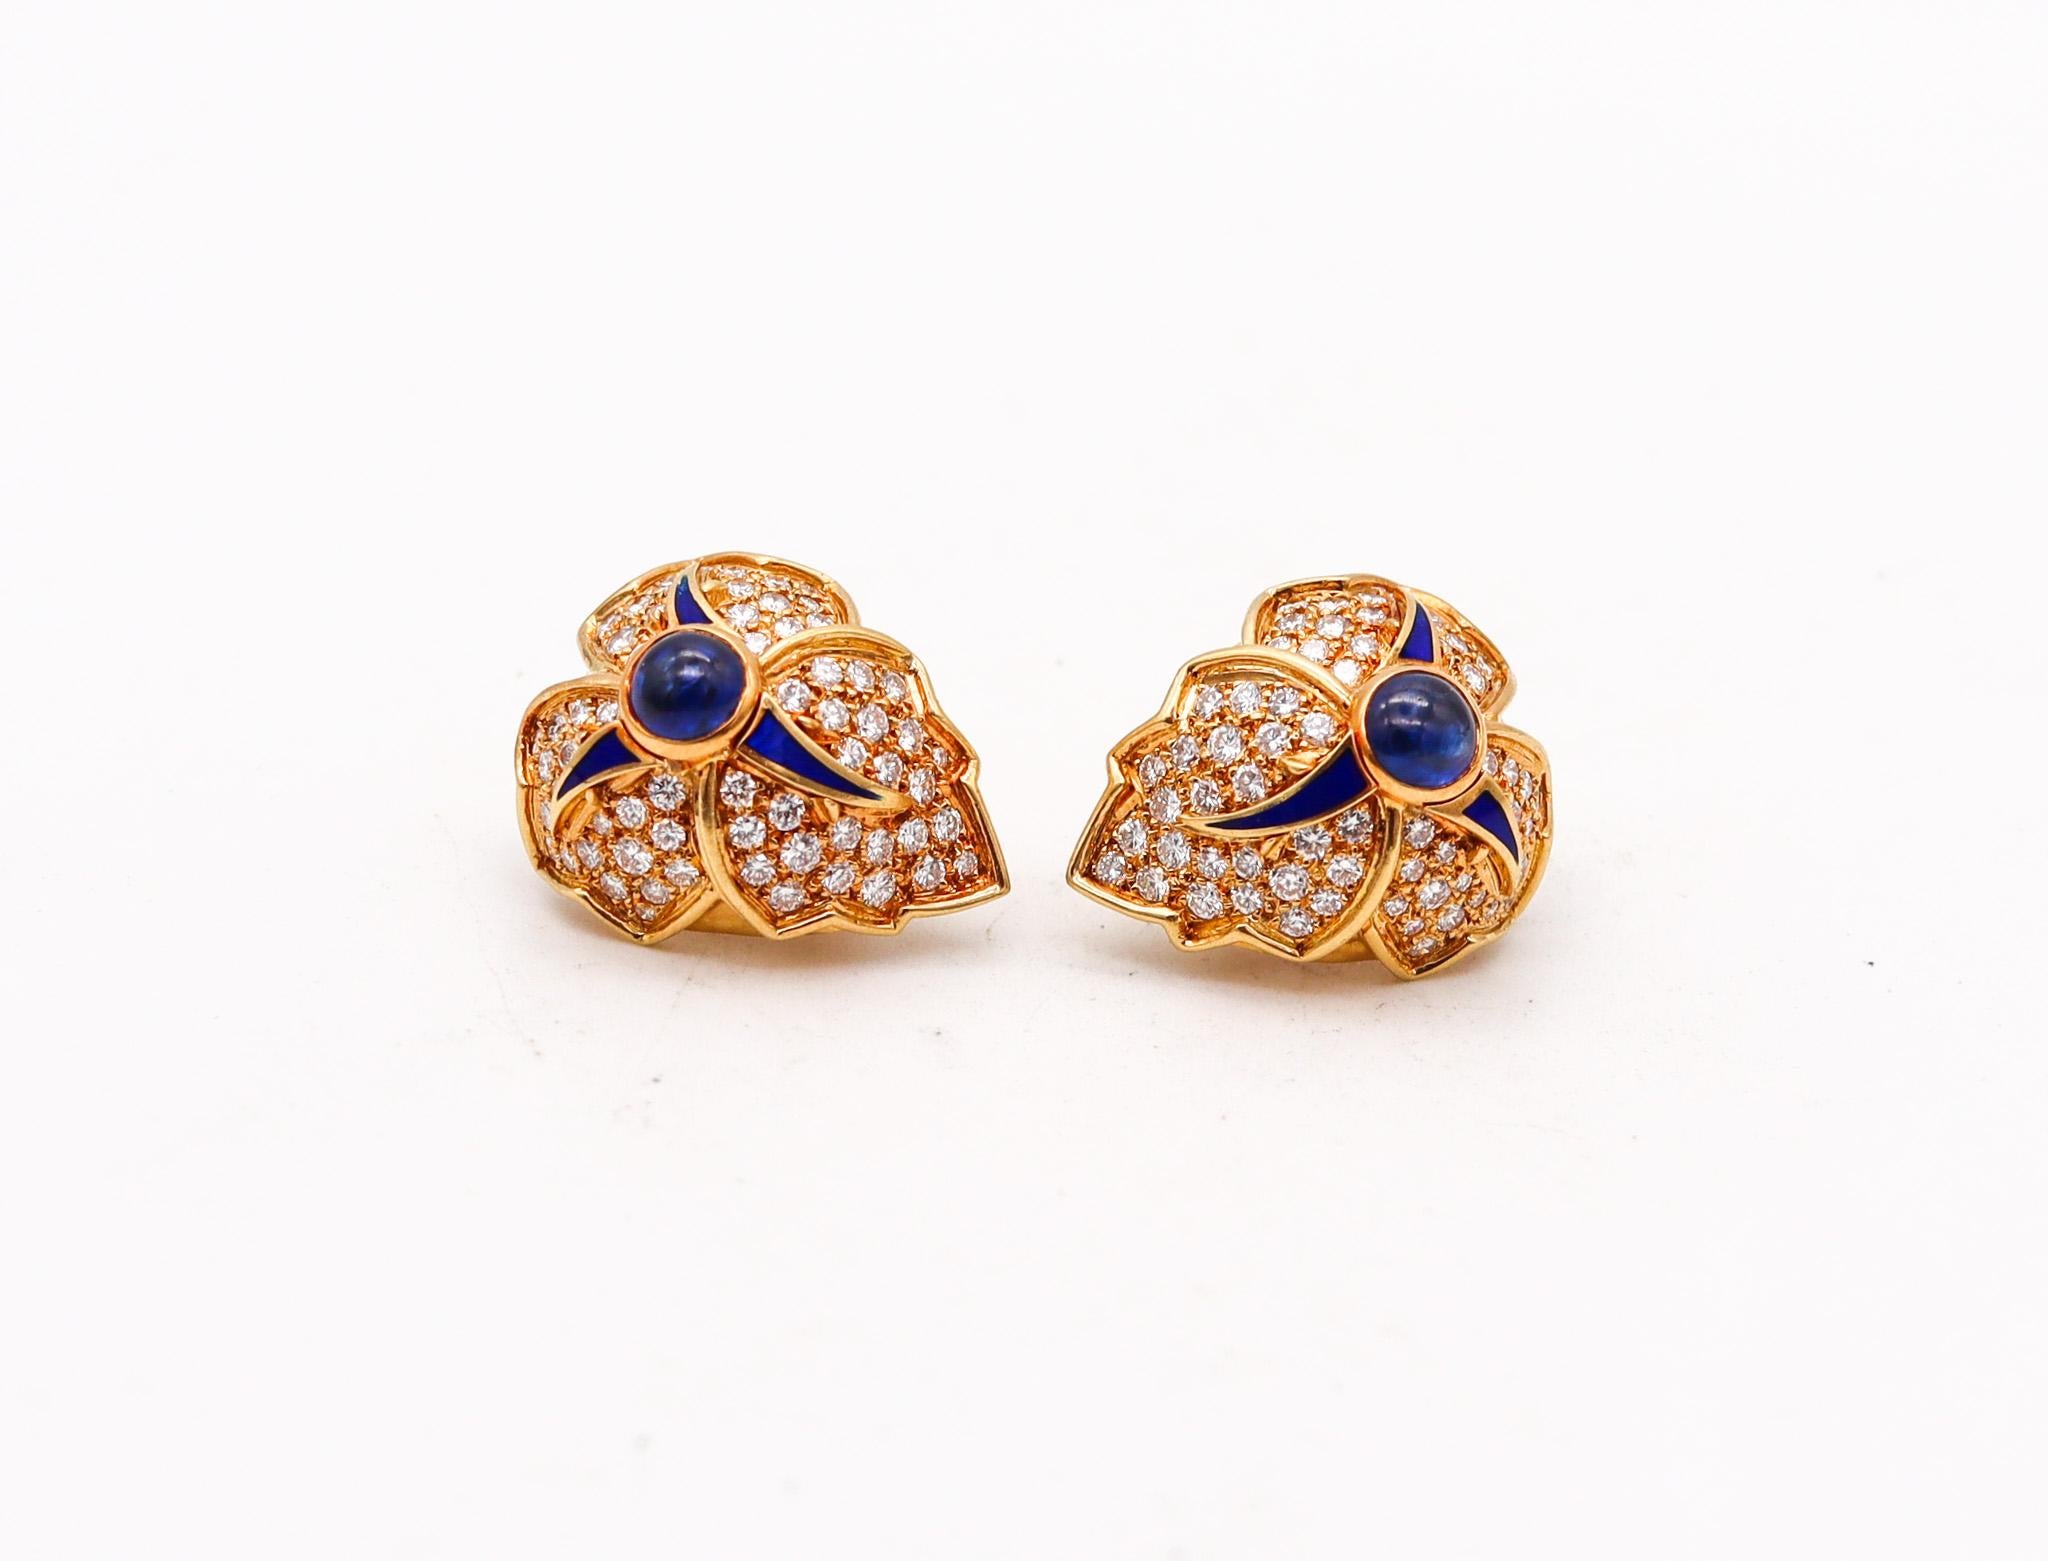 Clip on earrings designed by Chaumet.

Fabulous clip on earrings, created in Paris France by the Jewelry house of Chaumet, back in the 1970. Designed as a left and right pair and embellished with a great selection of natural earth mined gemstones.